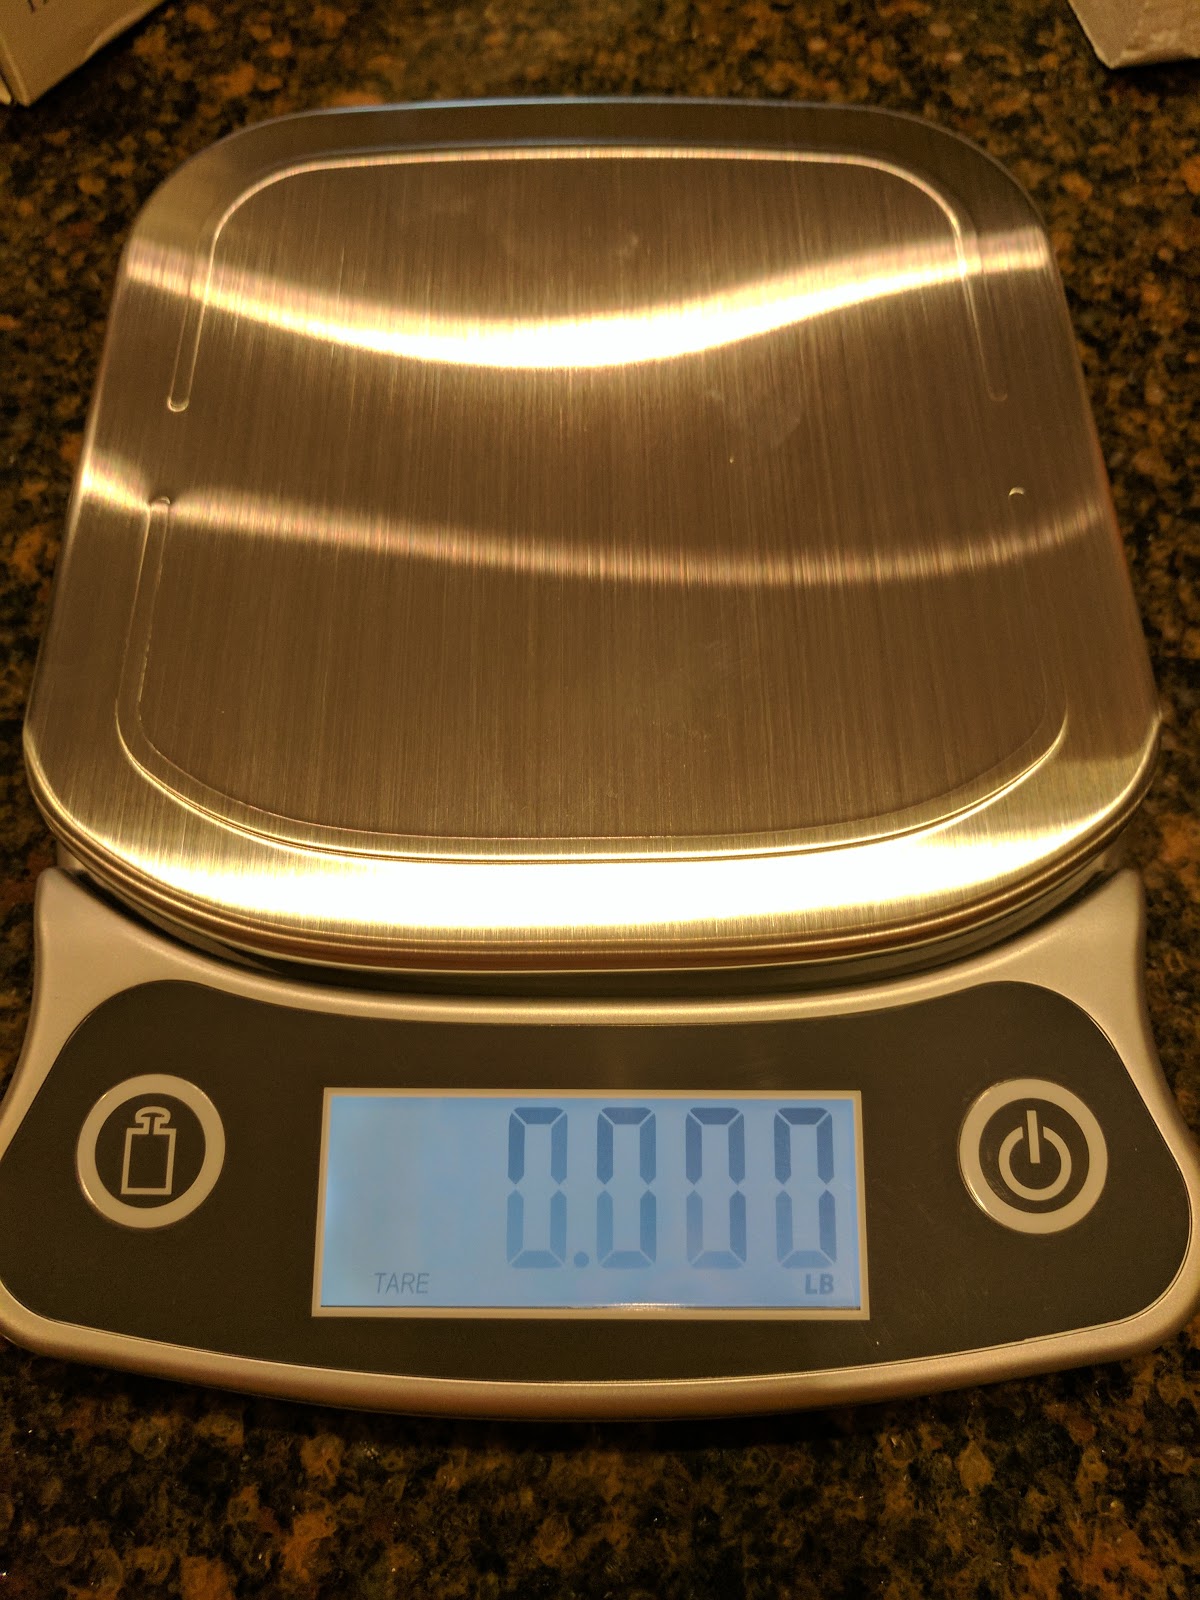 EatSmart Precision Elite Digital Kitchen Scale {Review & Giveaway} - The  PennyWiseMama